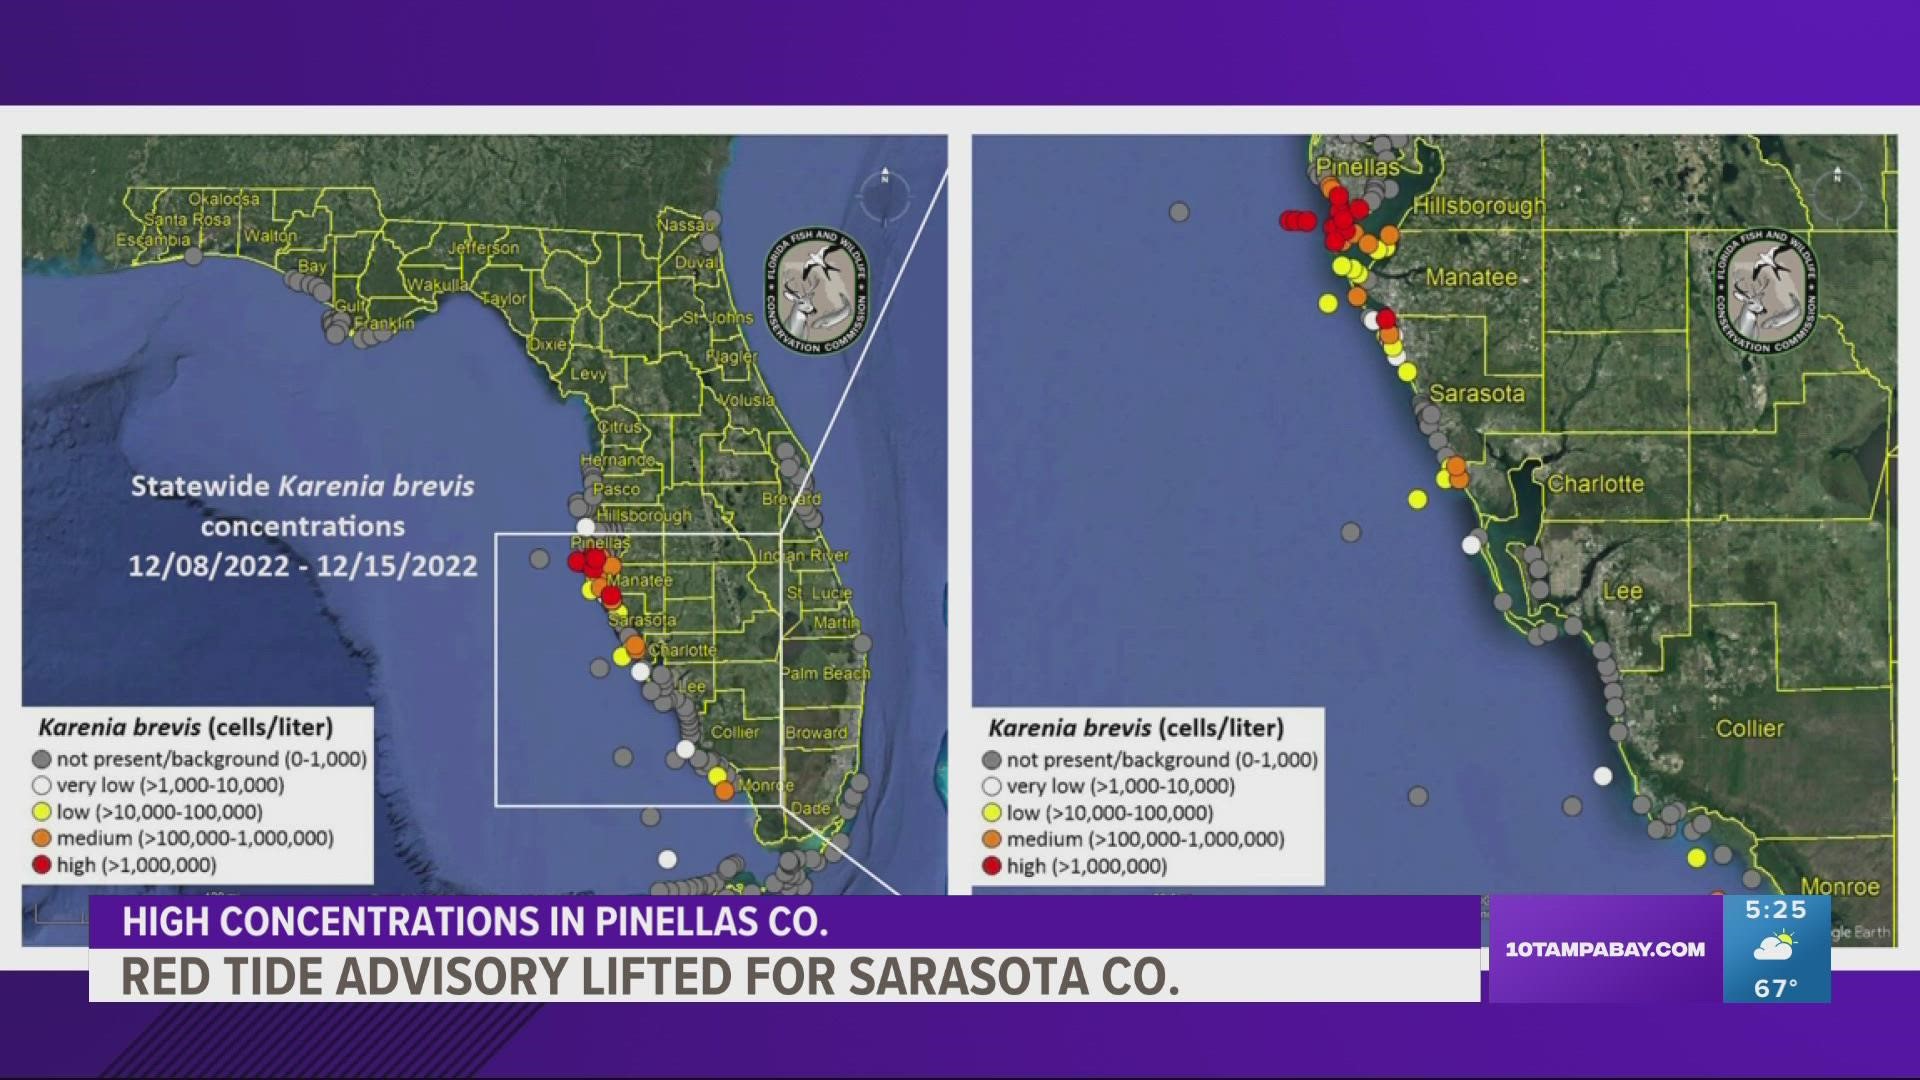 Red tide lingered in the Sarasota County area for more than one month.